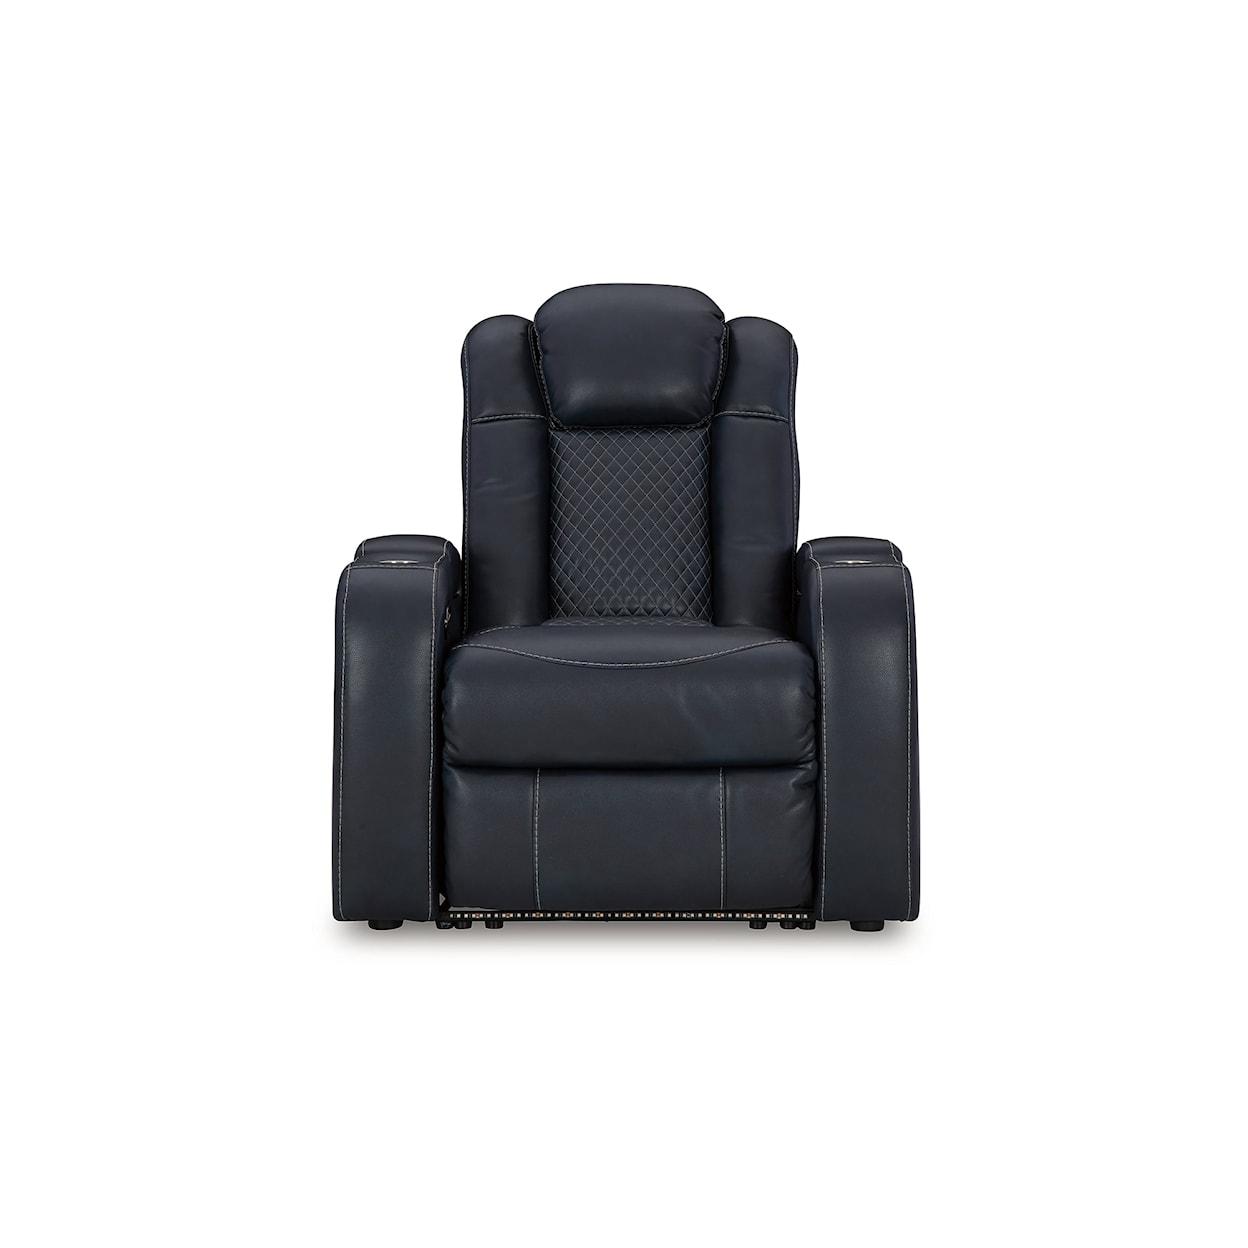 Signature Design by Ashley Furniture Fyne-Dyme Power Recliner